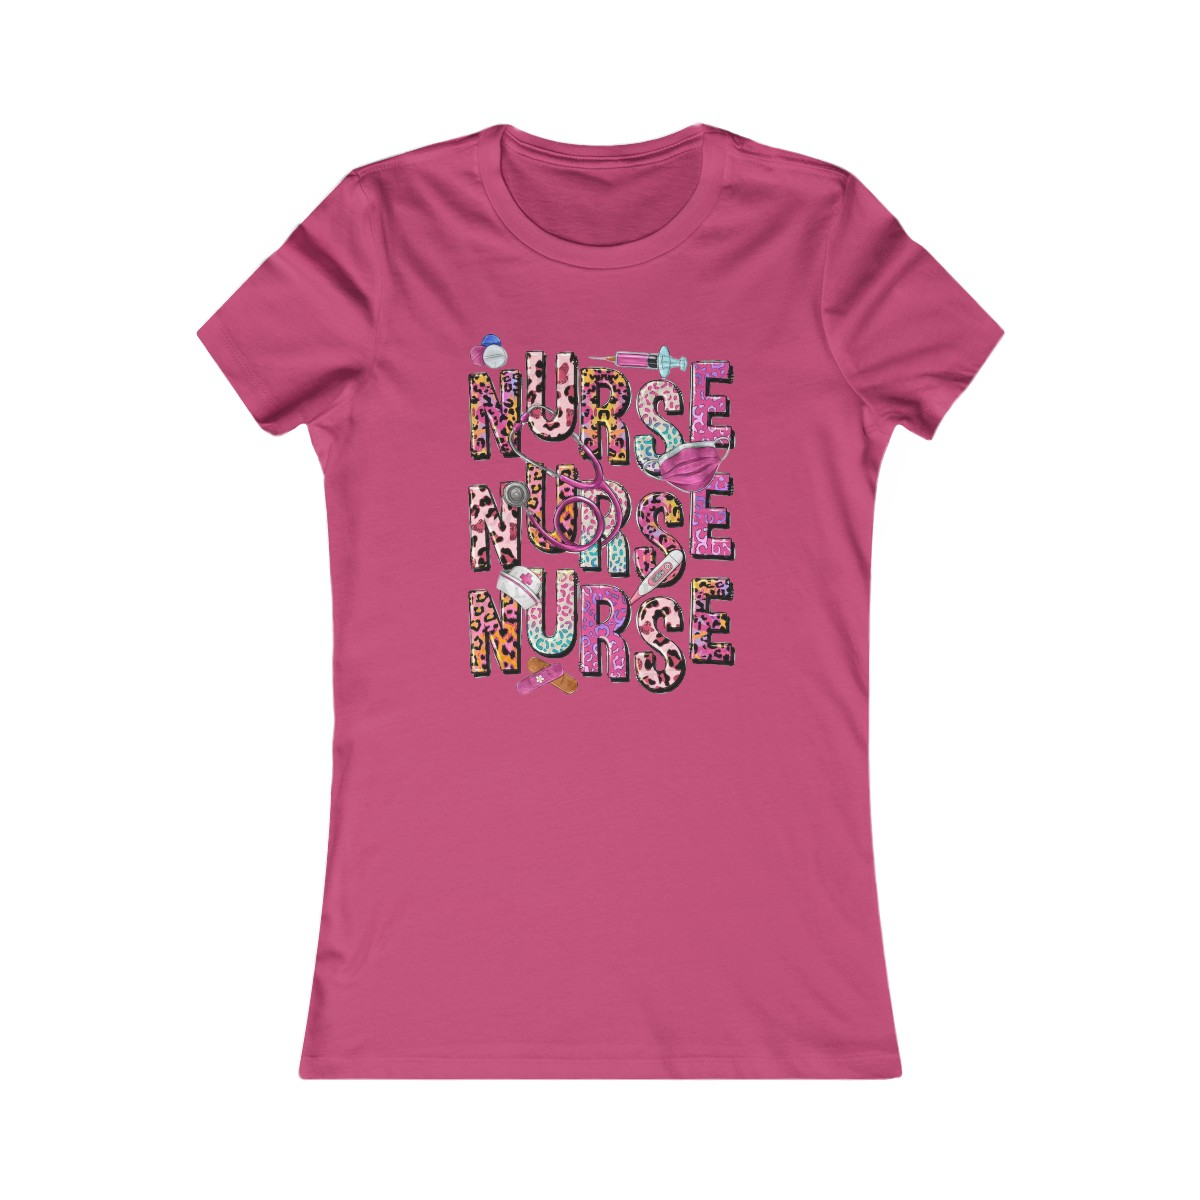 Custom Nurse T-Shirts: Personalized t-shirts designed specifically for nurses.